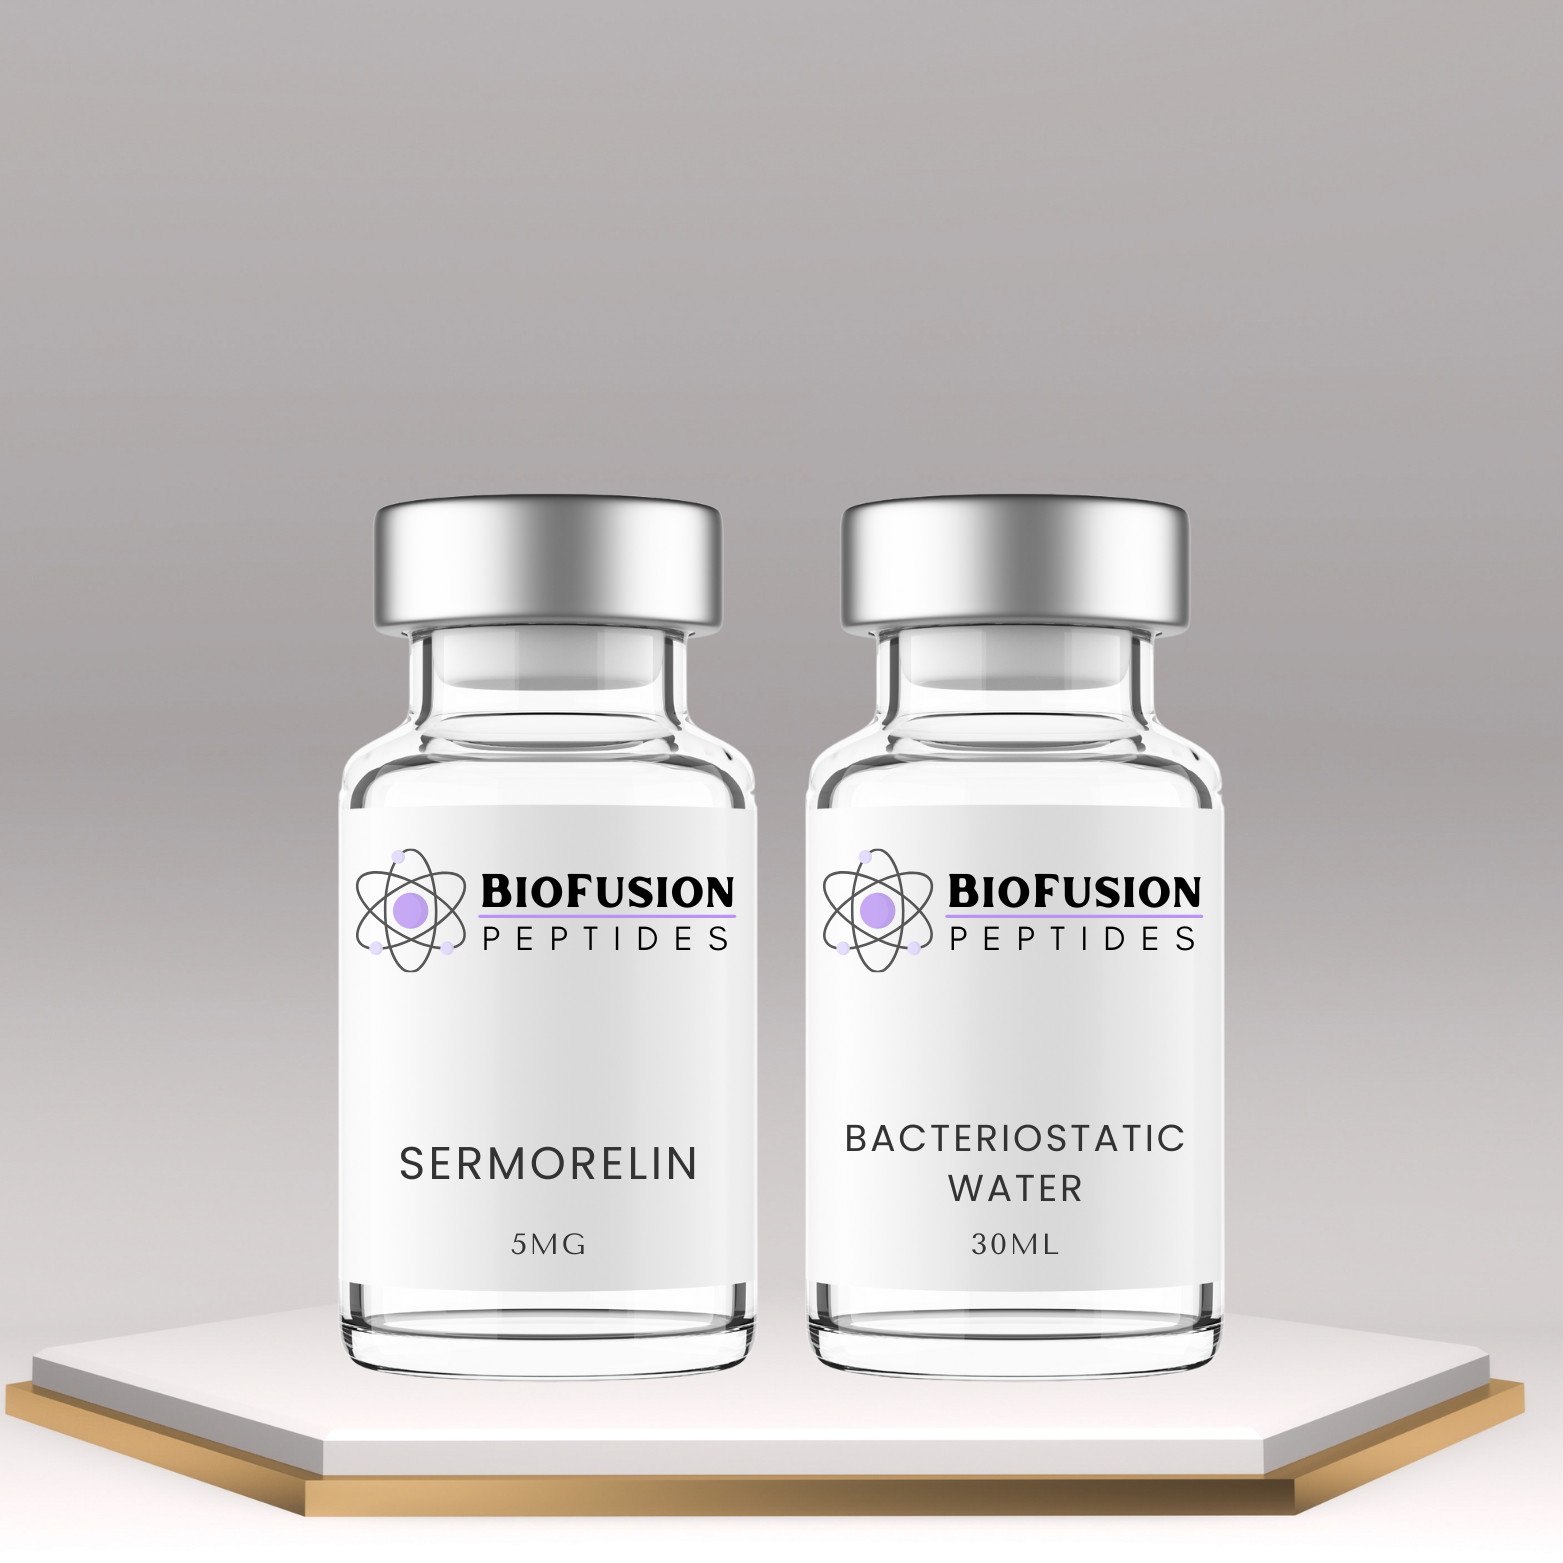 BioFusion Peptides Sermorelin kit with bacteriostatic water